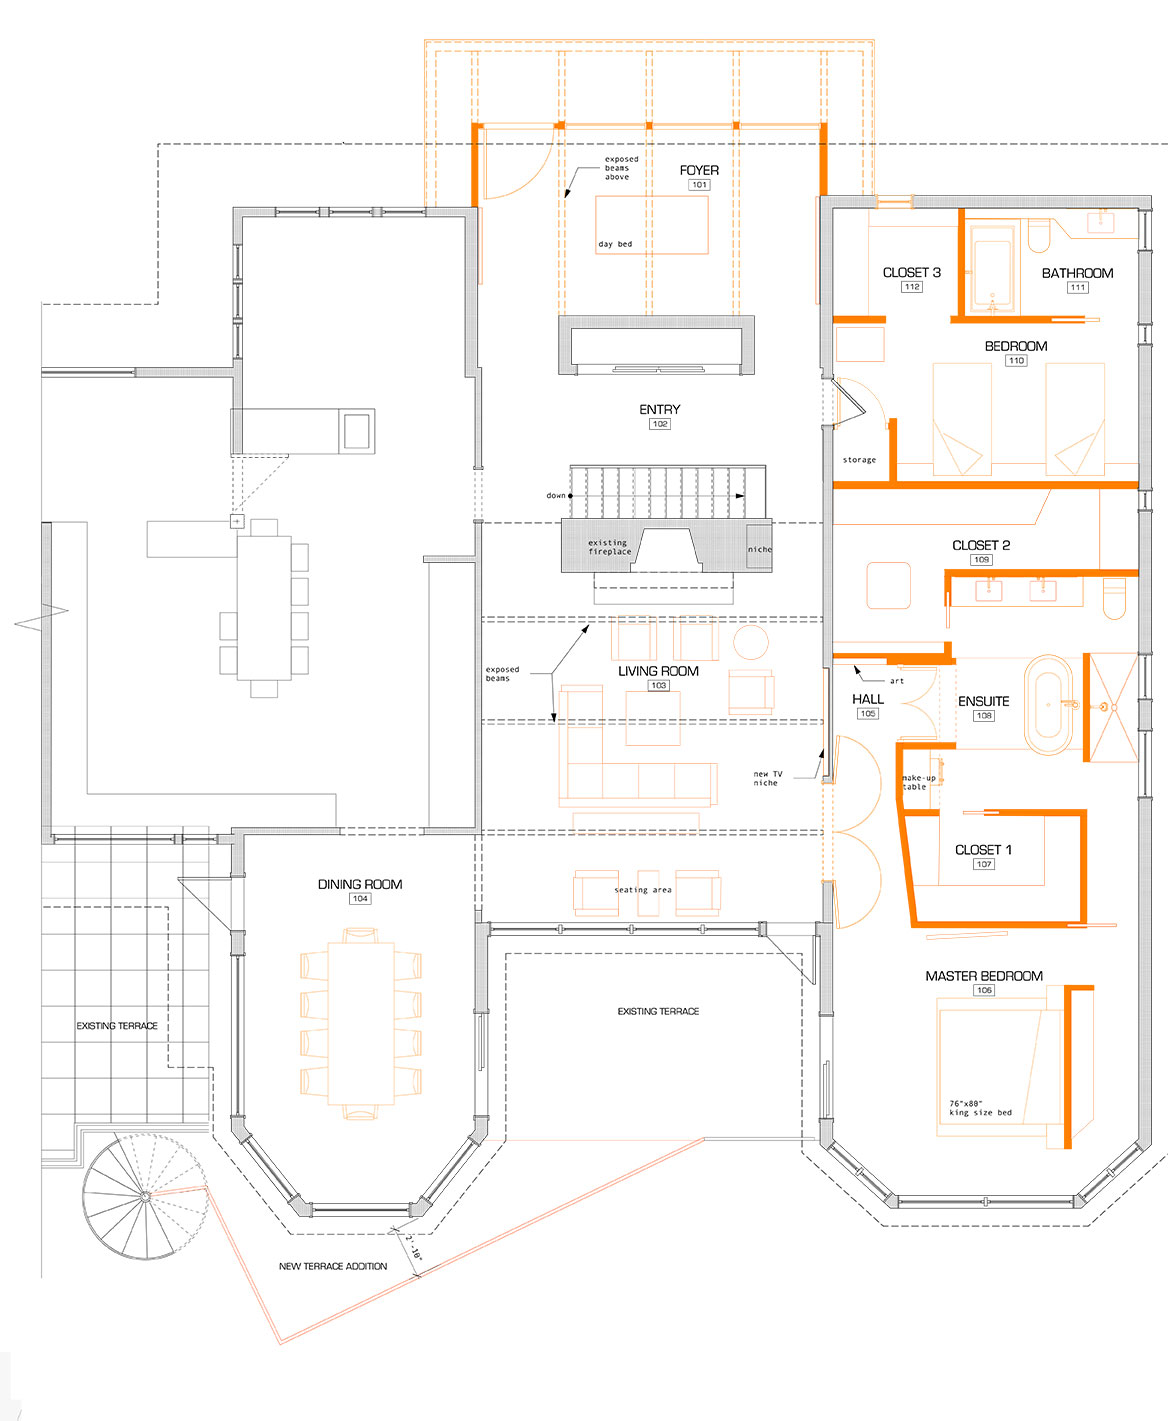 Unit 7 Architecture | Projects - South Drive Residence M - CONCEPT FLOOR PLAN 